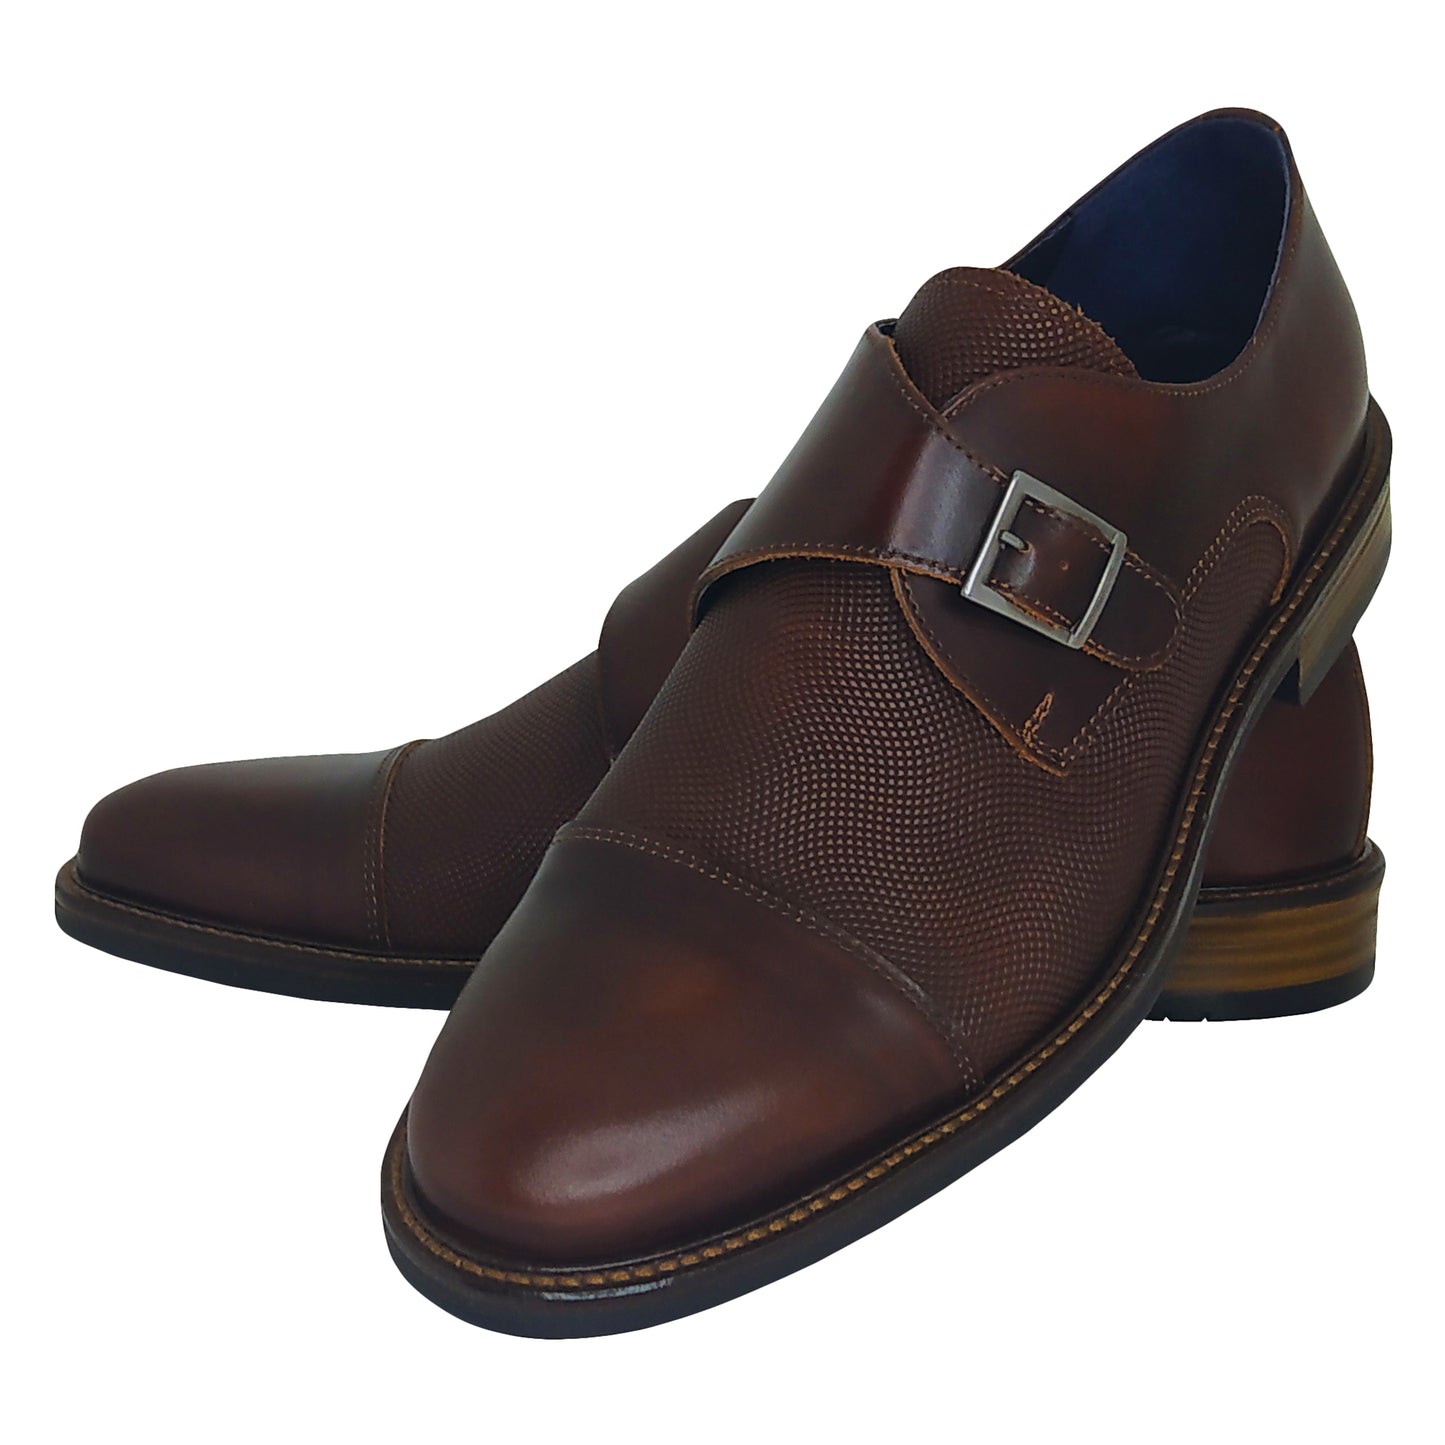 Handmade Leather Monk Straps Shoes with Brown Token 626